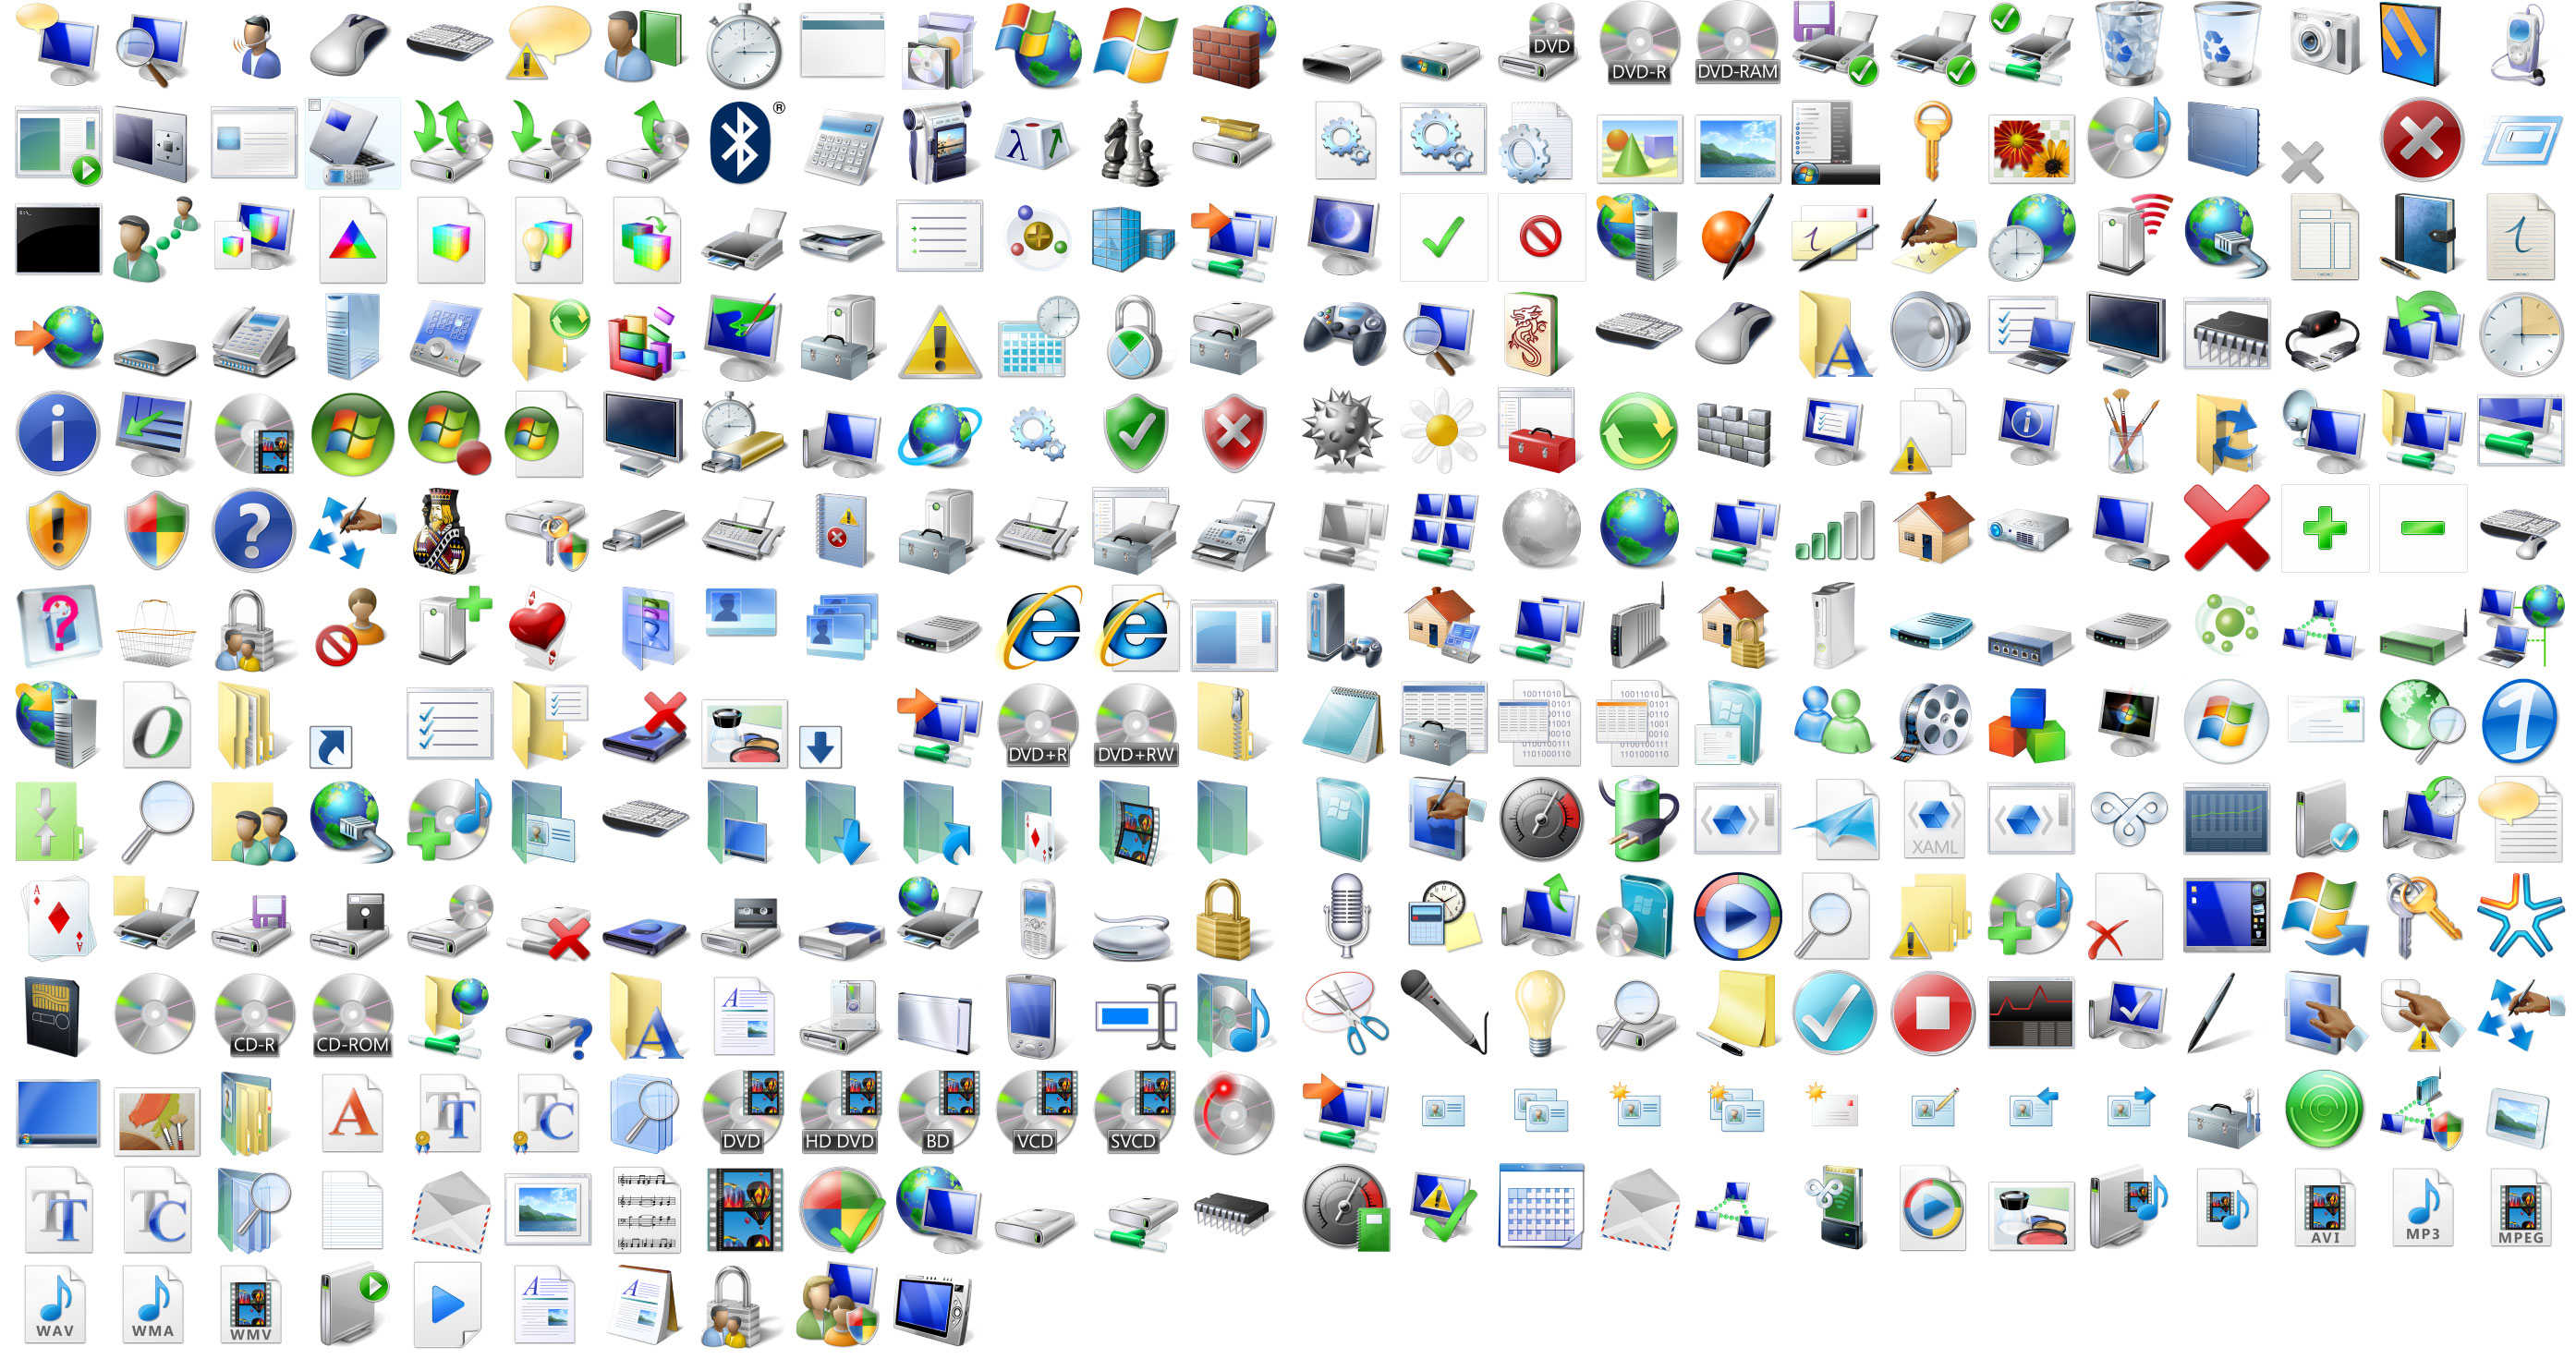 18 Free Icons For Windows Images